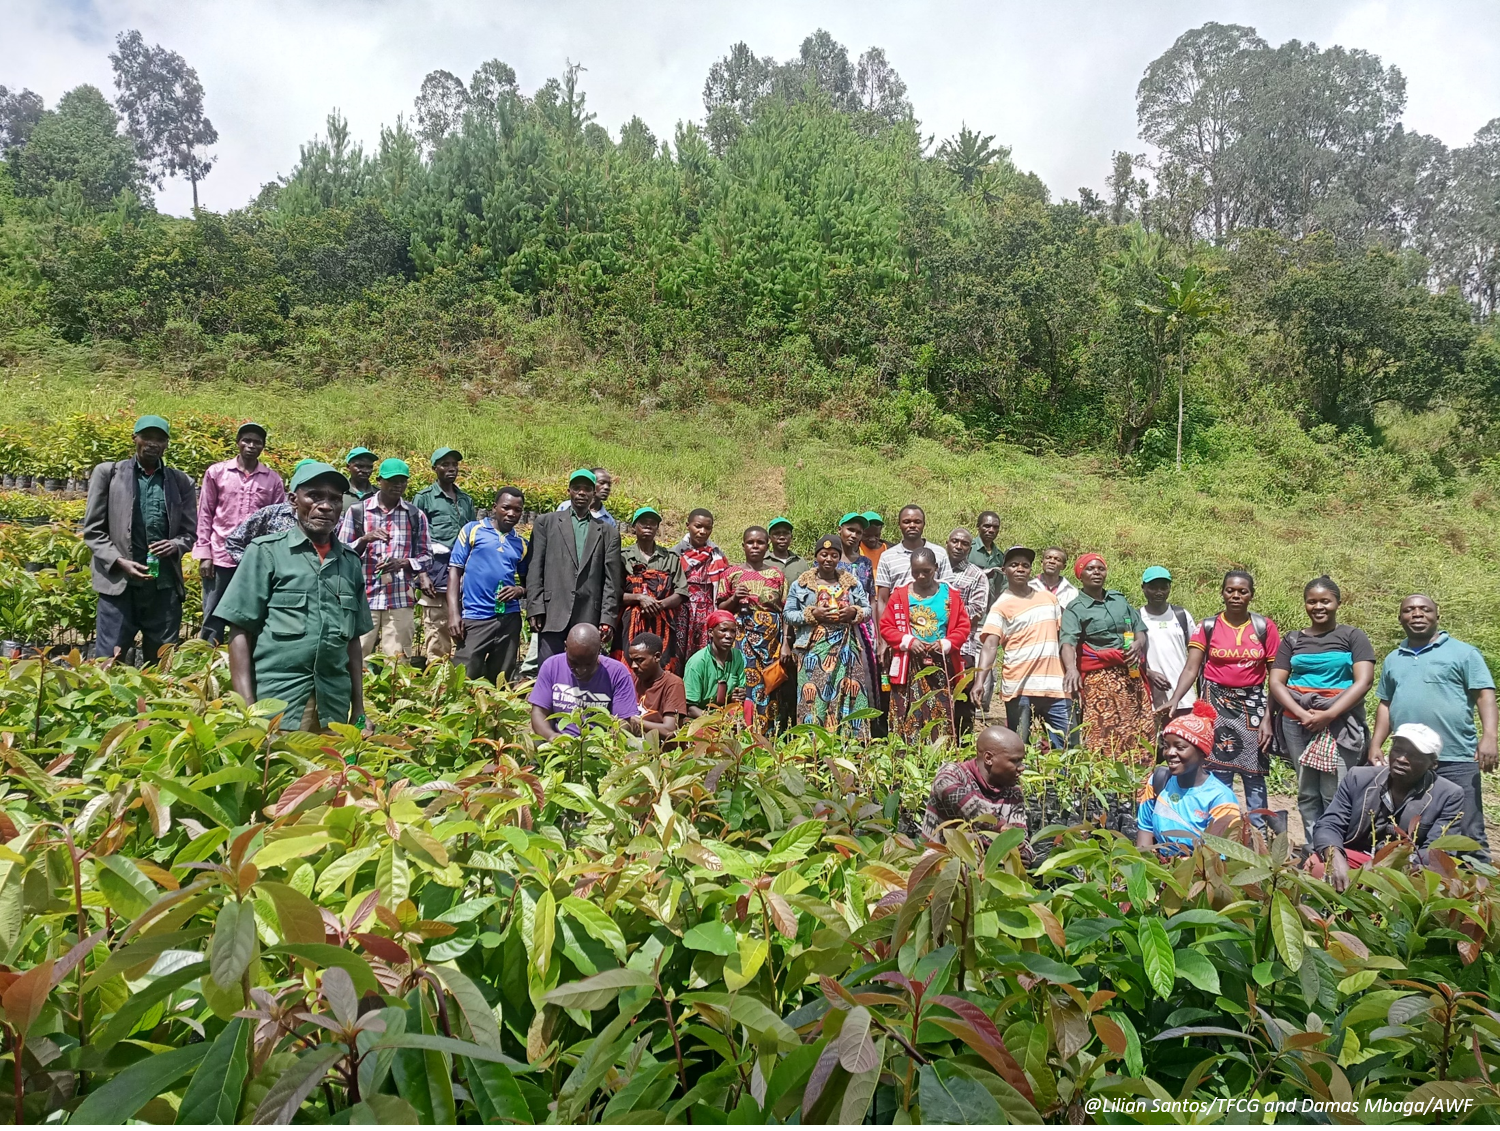 ABCG GCI reforestation activity in Mngeta Valley Tanzania organized the African Wildlife Foundation and the Tanzania Forest Working Group 